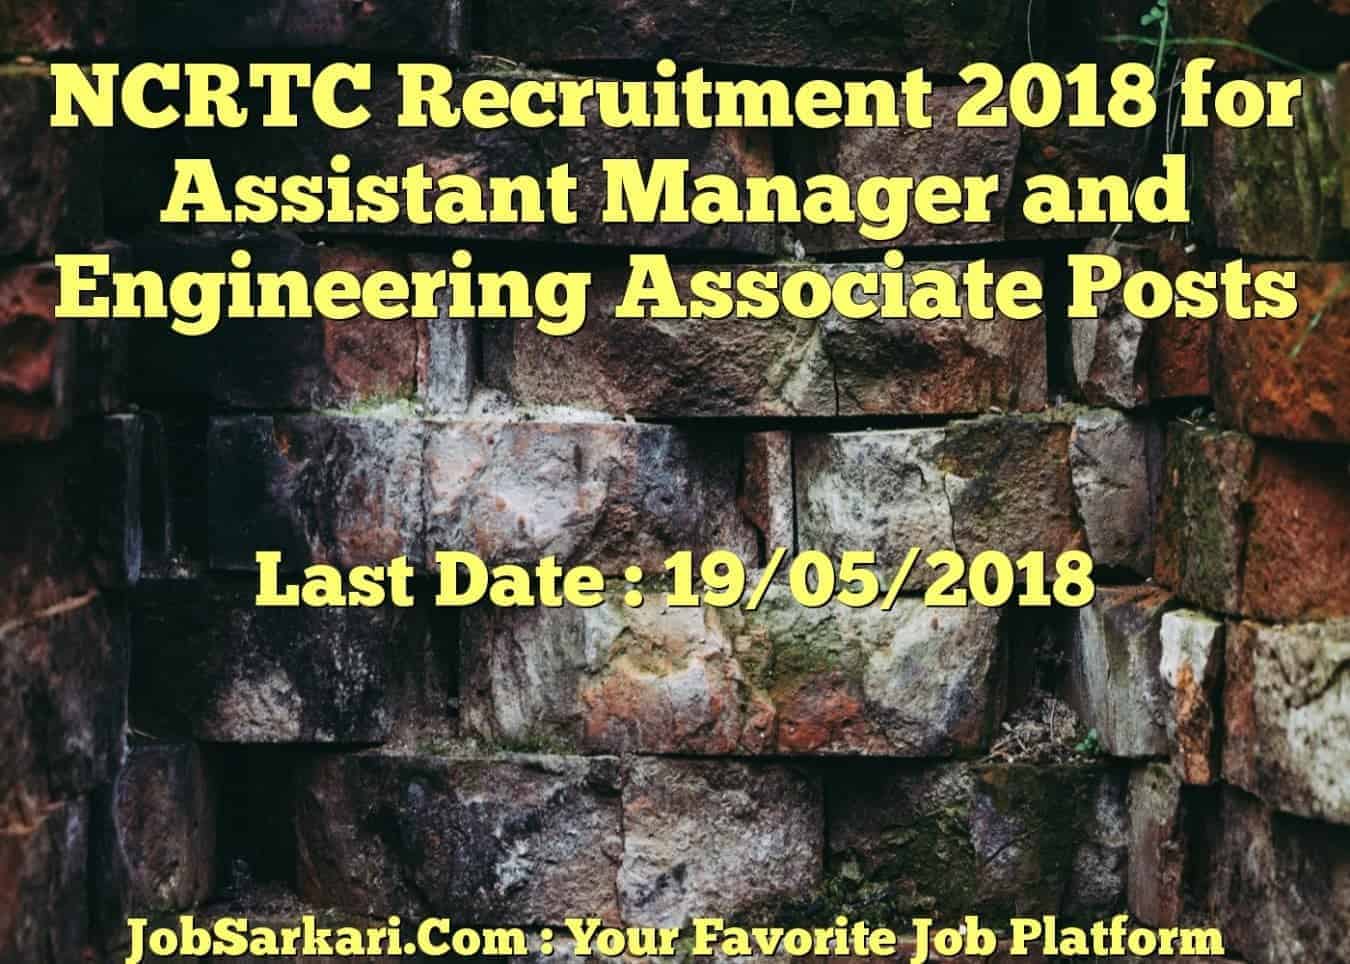 NCRTC Recruitment 2018 for Assistant Manager and Engineering Associate Posts